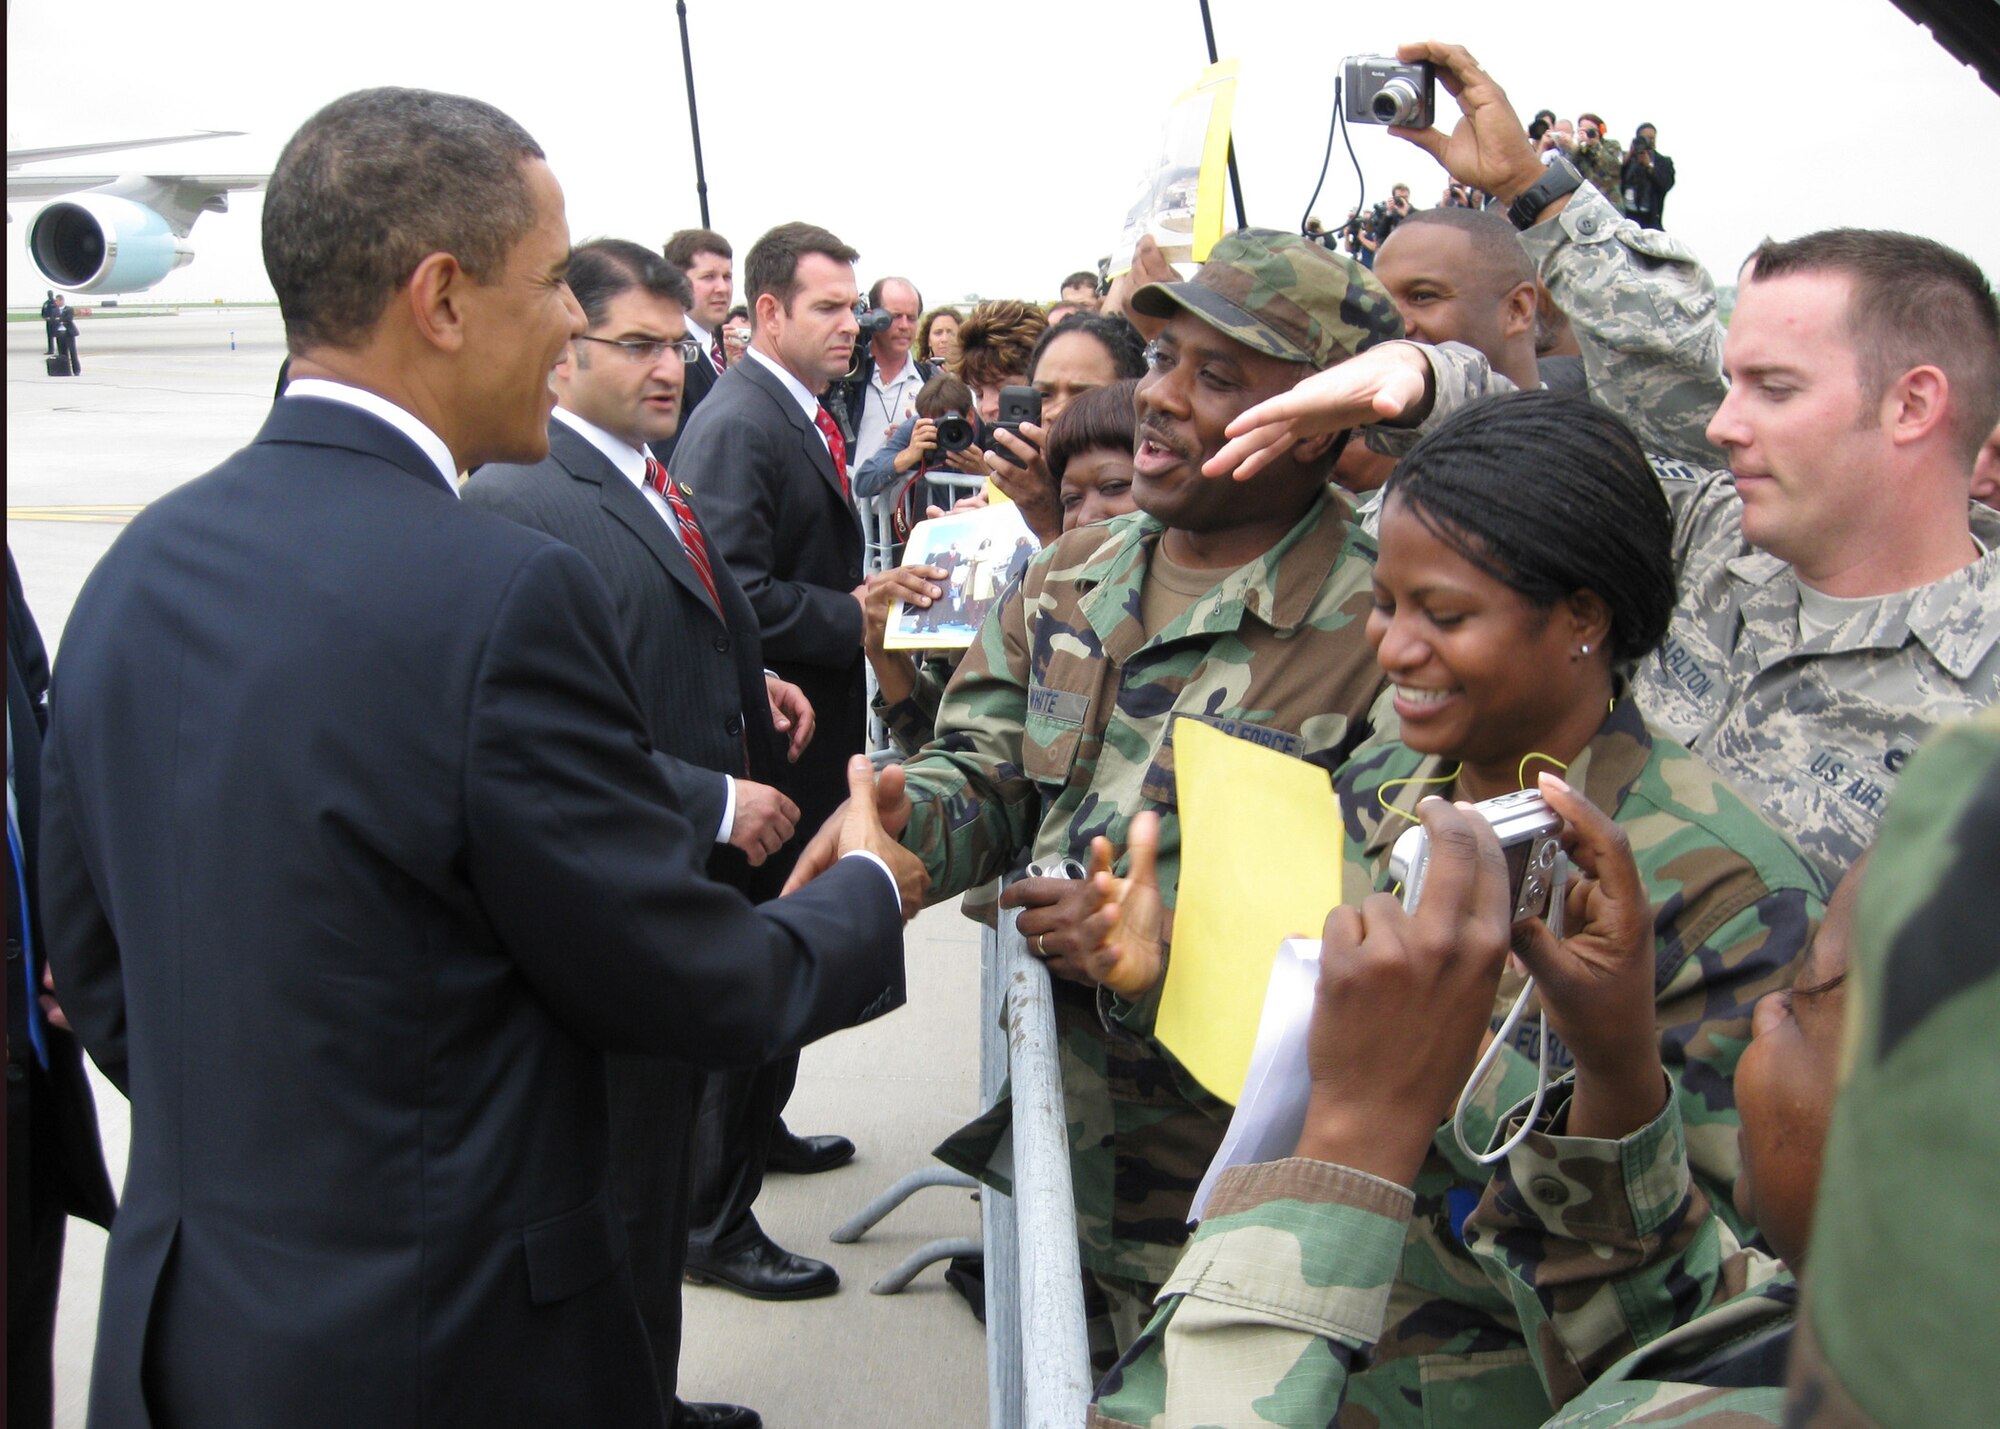 While the media looks on, President Barack Obama greets a member of the 131st Fighter Wing, Missouri Air National Guard, at Lambert-Saint Louis International Airport prior to his departure on Air Force One on April 29.  President Obama marked his 100th day in office with a Town Hall Meeting in Arnold, a surburb of Saint Louis, earlier that day. (U.S. Air Force Photo by Lorenzo "Skip" Doyle)  (RELEASED)